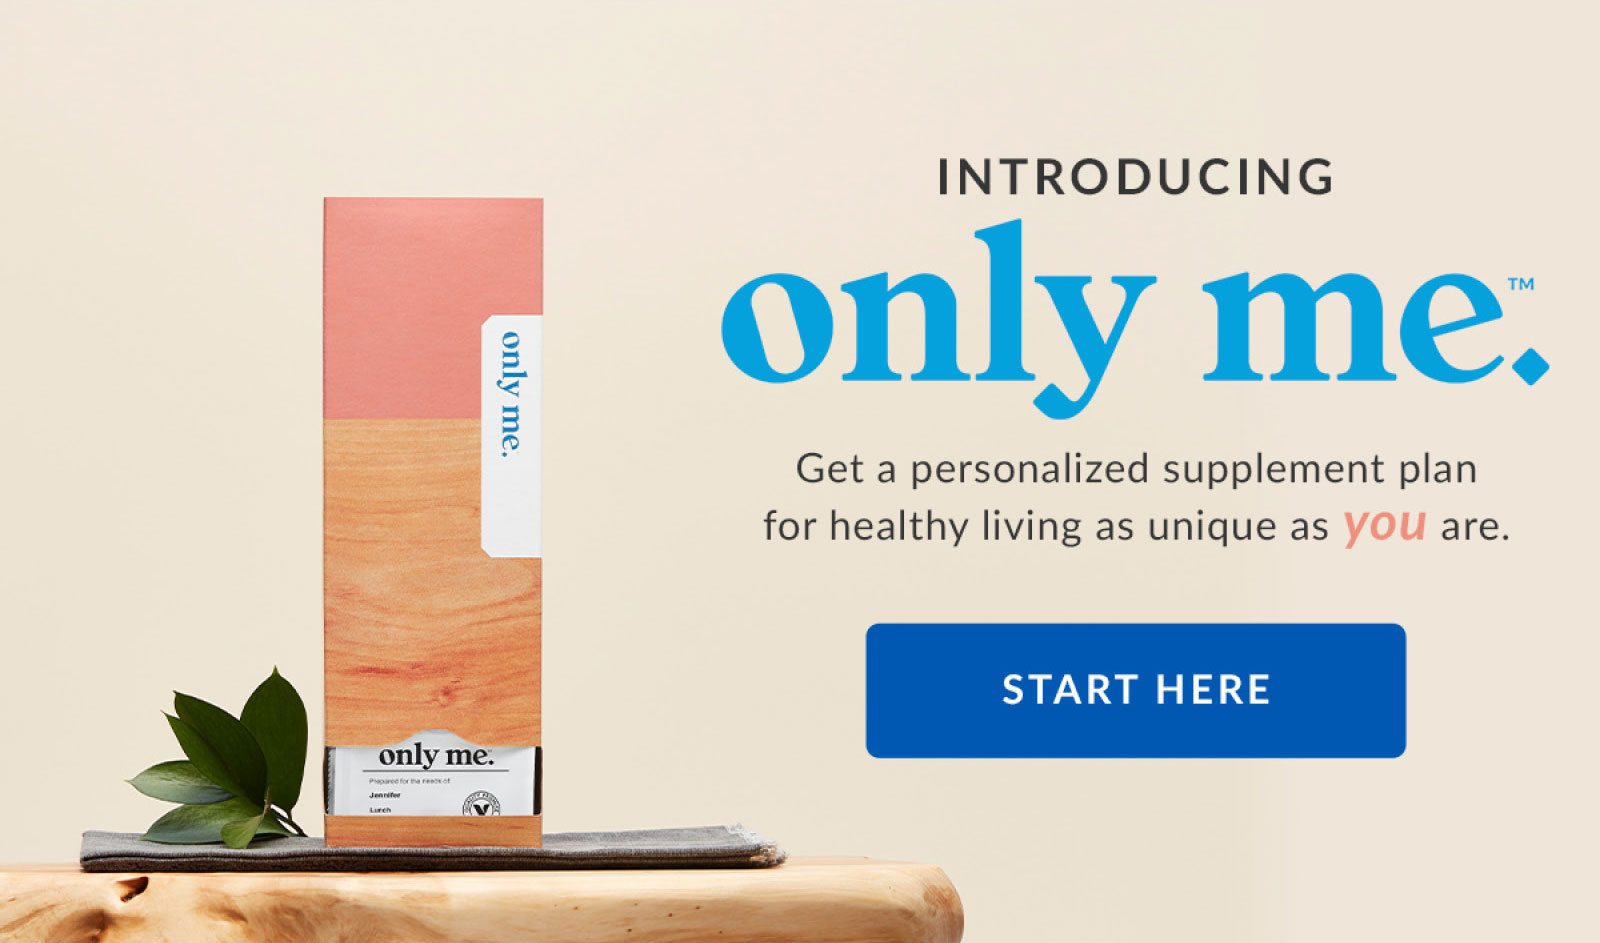 INTRODUCING only me. | Get a personalized supplement plan for healthy living as unique as you are. | START HERE